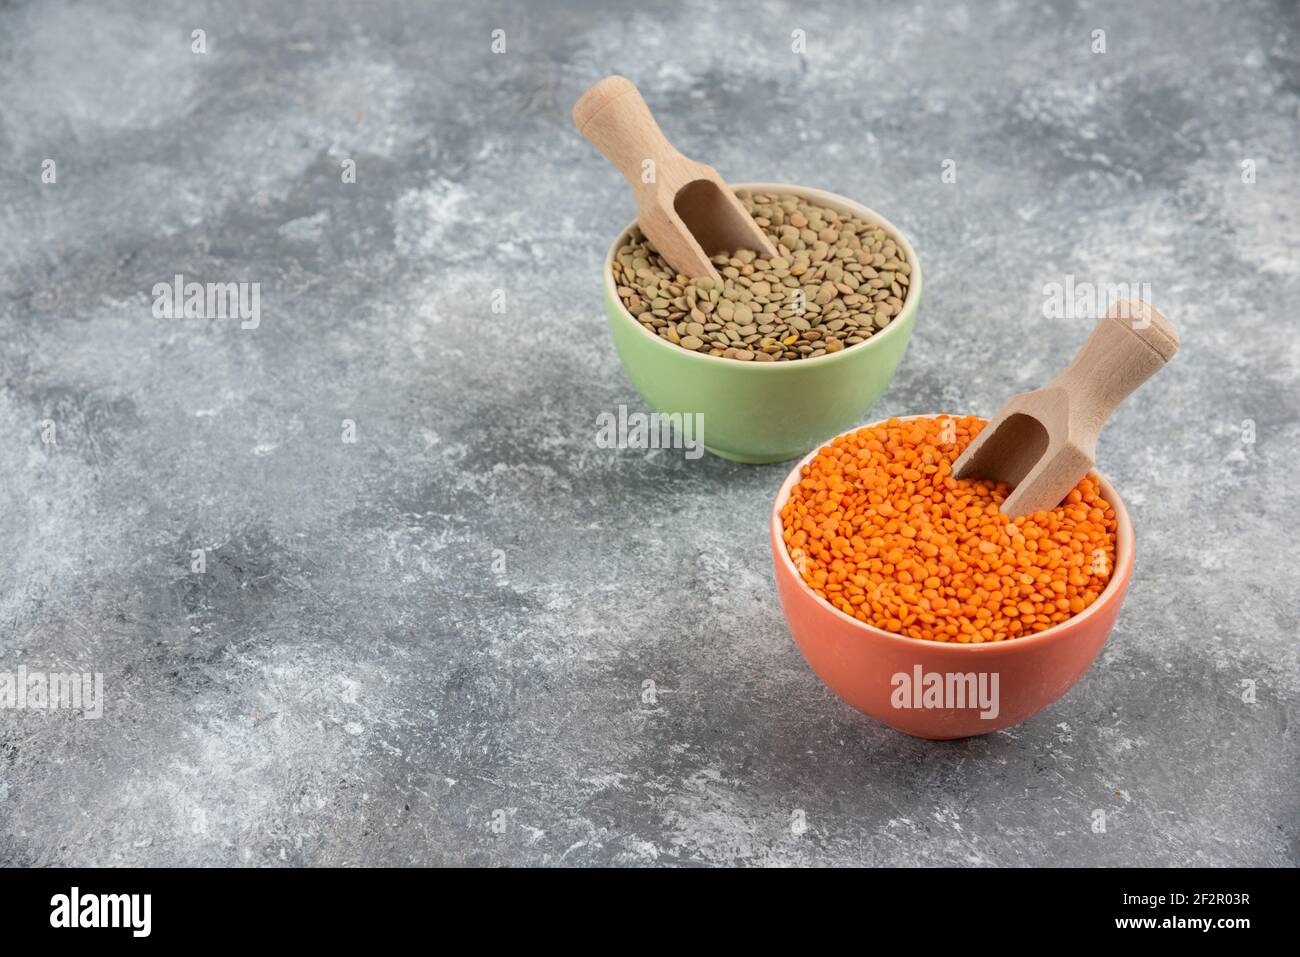 Red uncooked lentils and split peas in colorful bowls Stock Photo